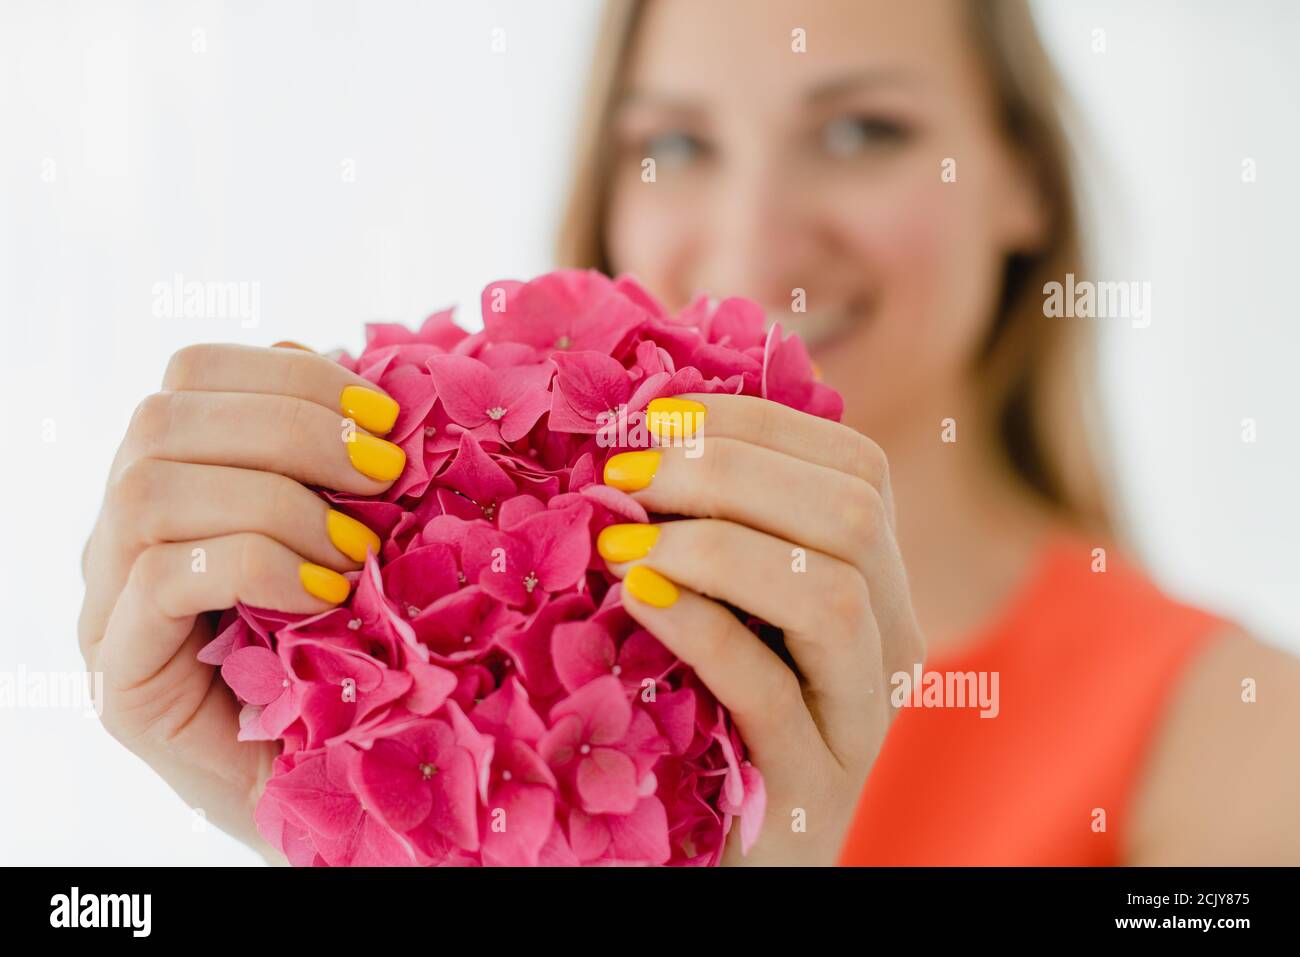 Women with manicured nails in yellow holding a flower Stock Photo